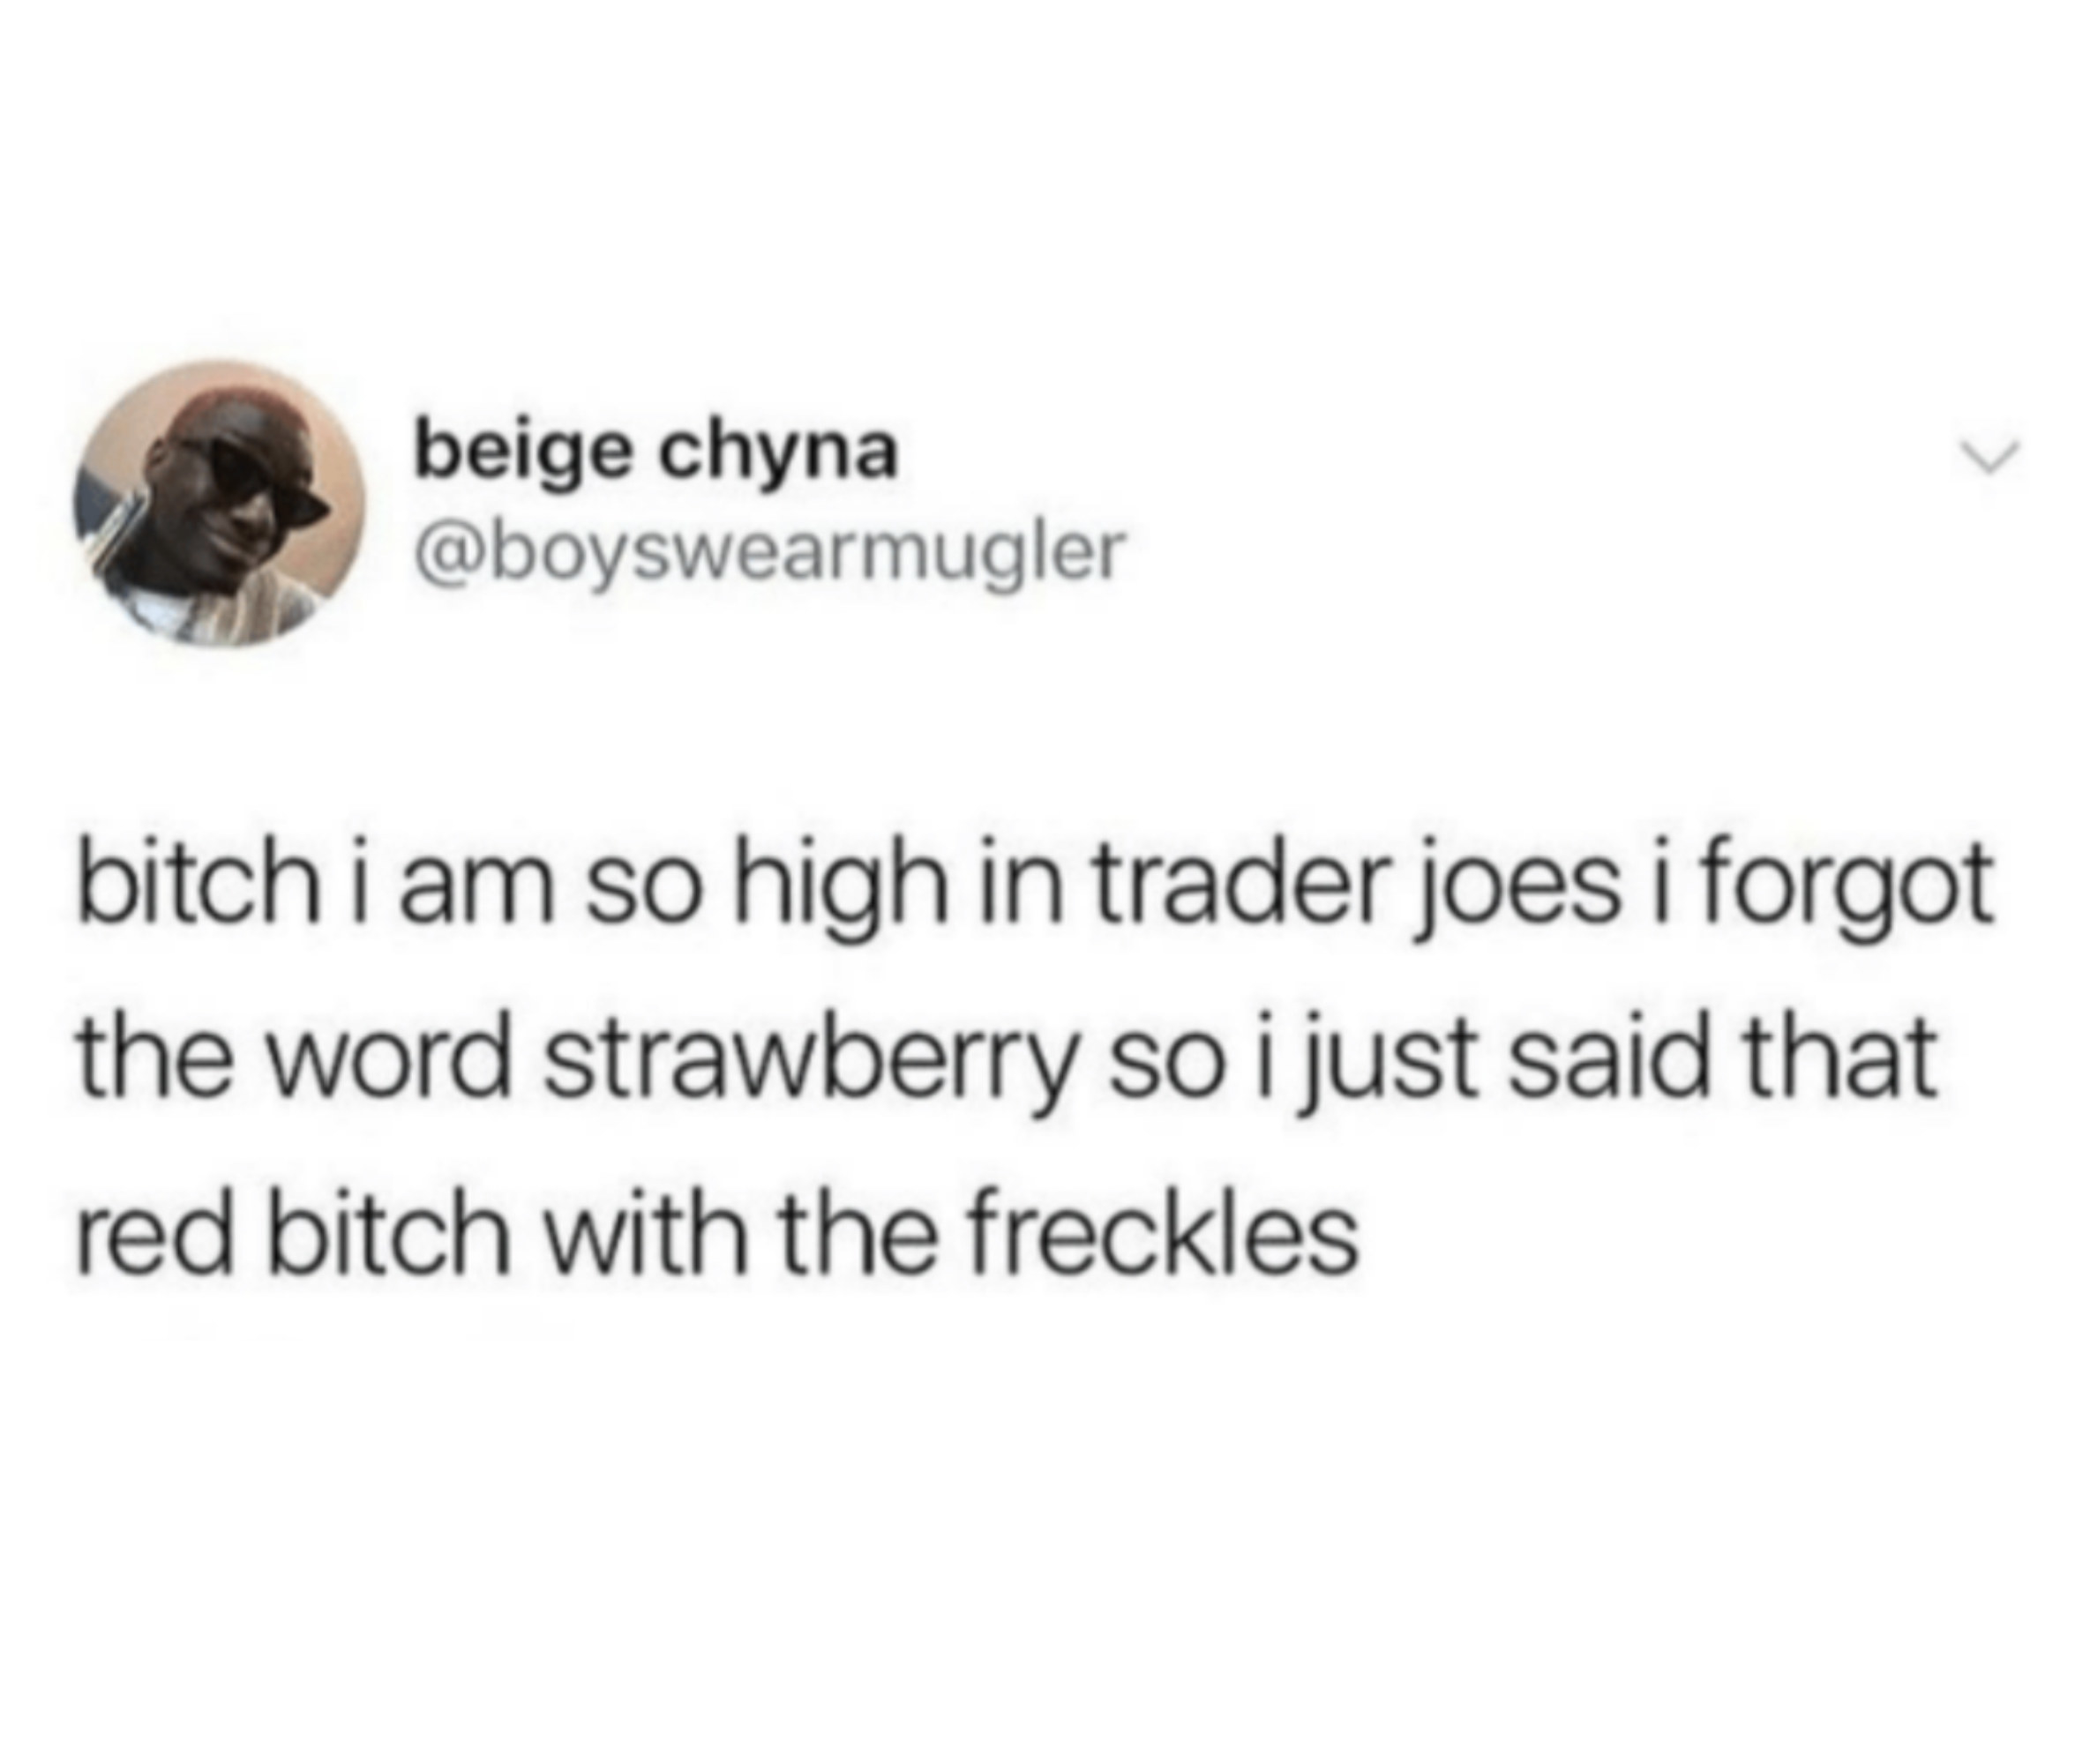 tweet reading bitch i am so high in trader joes i forgot the word strawberry so i just said that red bitch with freckles